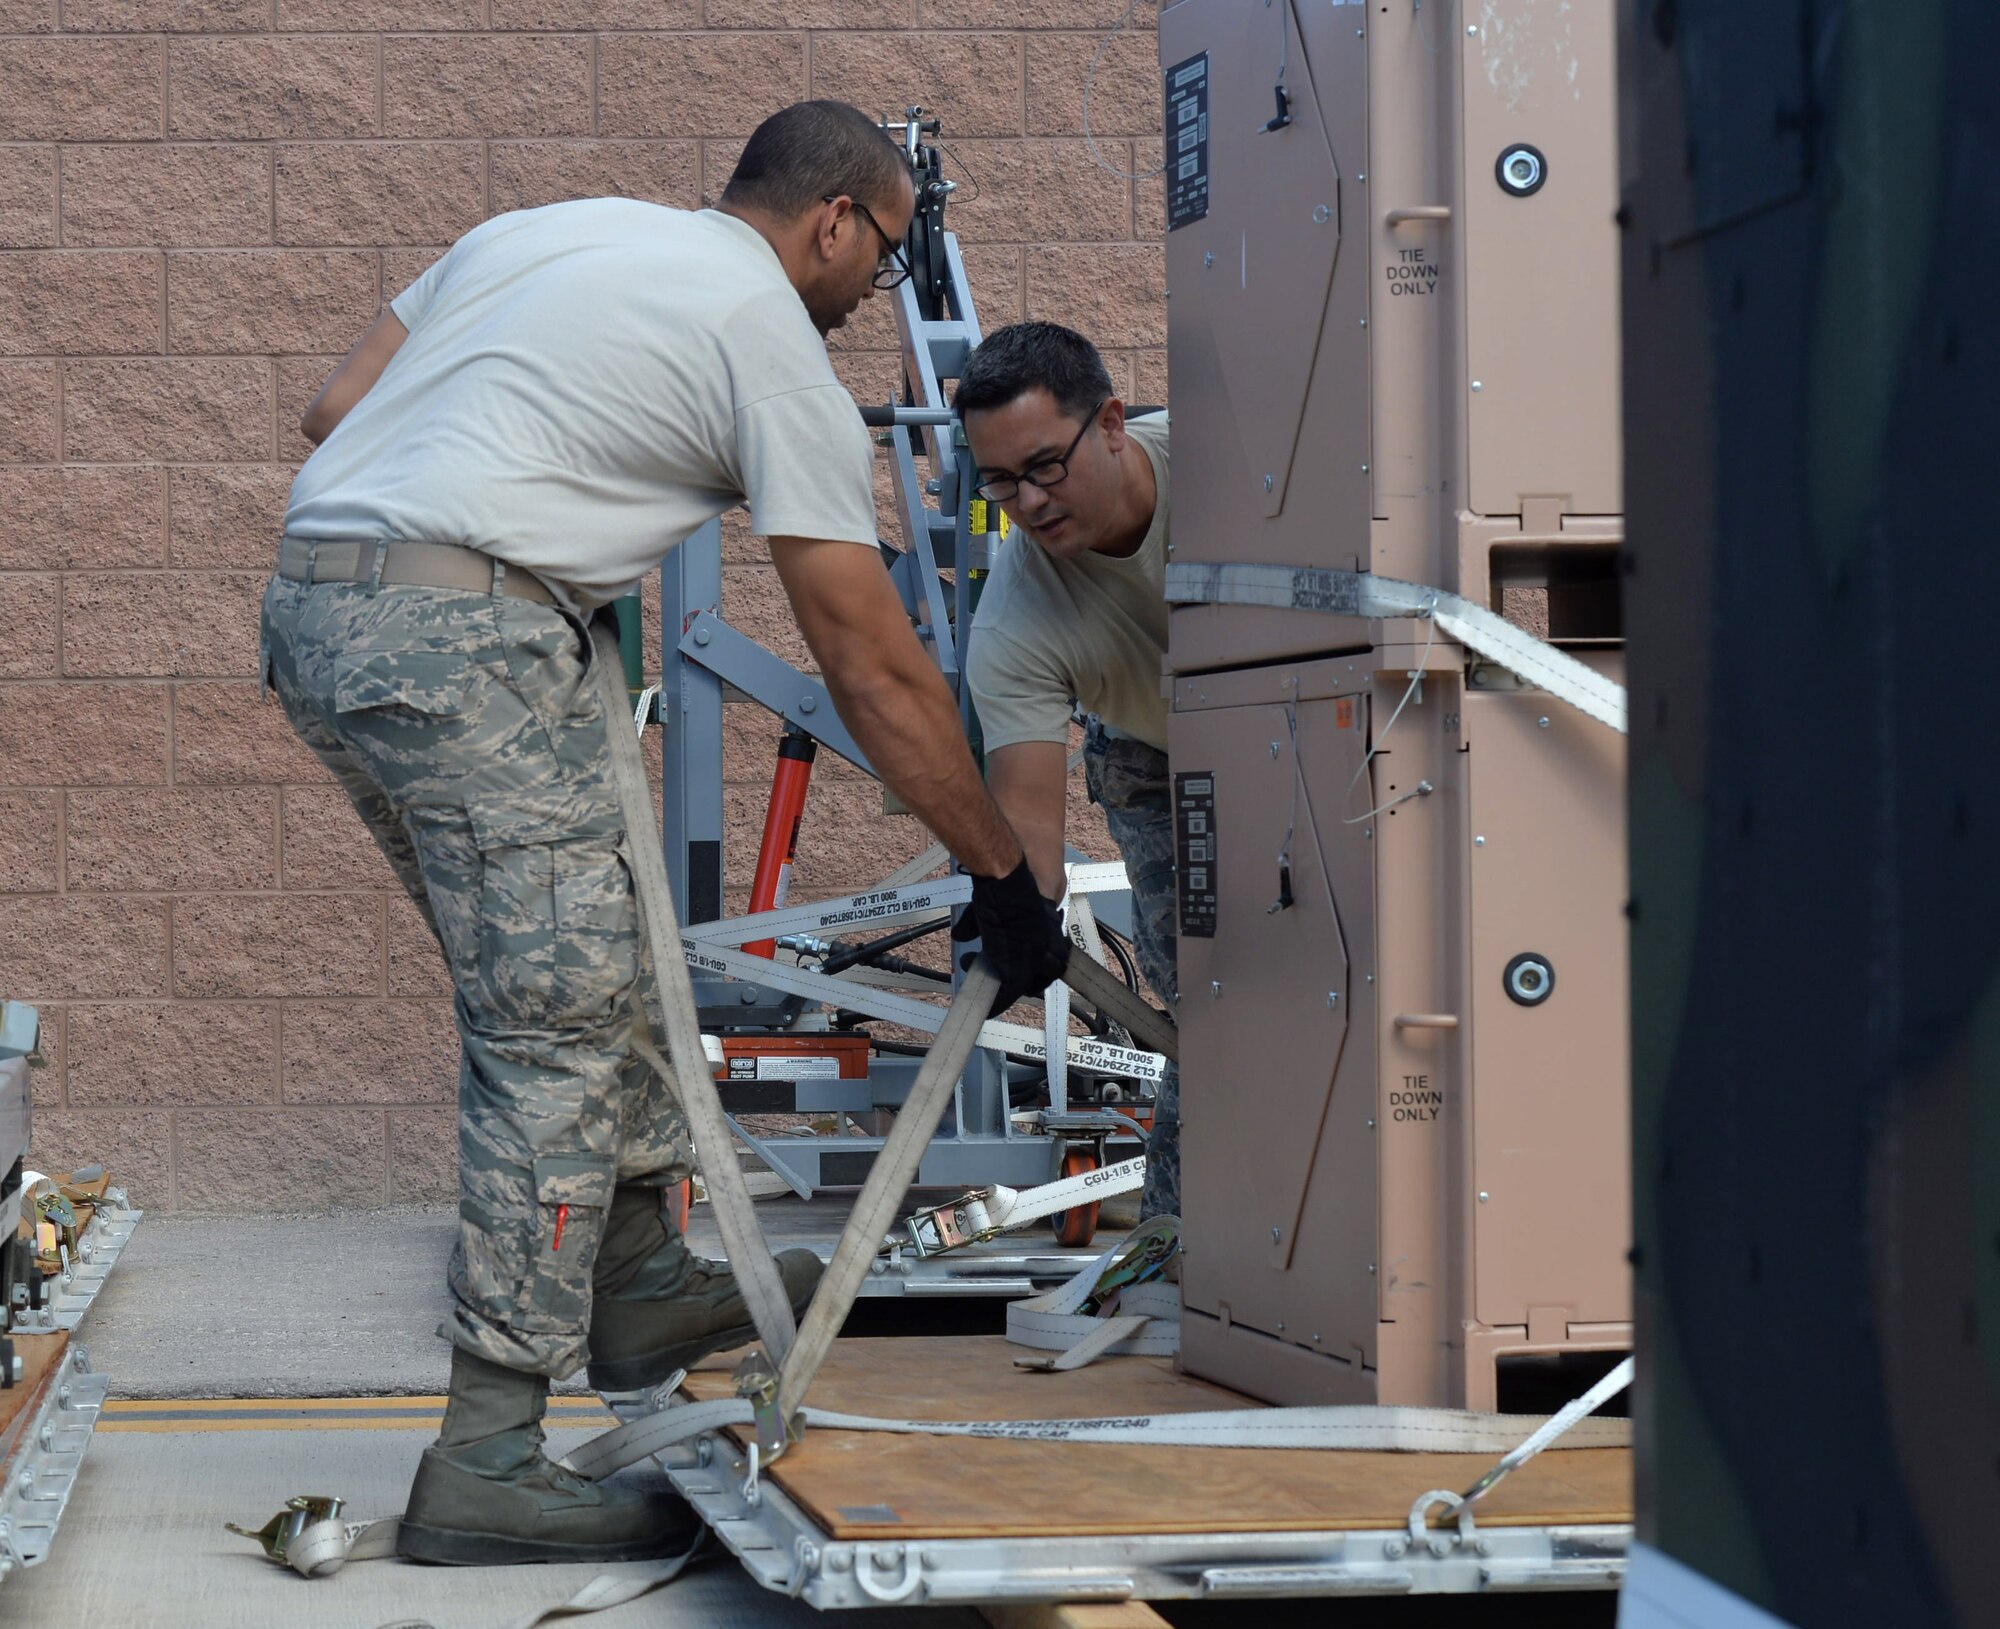 Staff Sgt. Israel, 432nd Maintenance Squadron Aerospace Ground Equipment craftsman, left, and Tech. Sgt. Nicholas, 432nd MXS AGE craftsman, right, secure safety restraints on equipment Oct. 6, 2015, at Creech Air Force Base, Nevada. The 432nd AGE shop sends packages of ground support equipment to deployed locations to support remotely piloted aircraft missions abroad. (U.S. Air Force photo by Senior Airman Christian Clausen/Released)